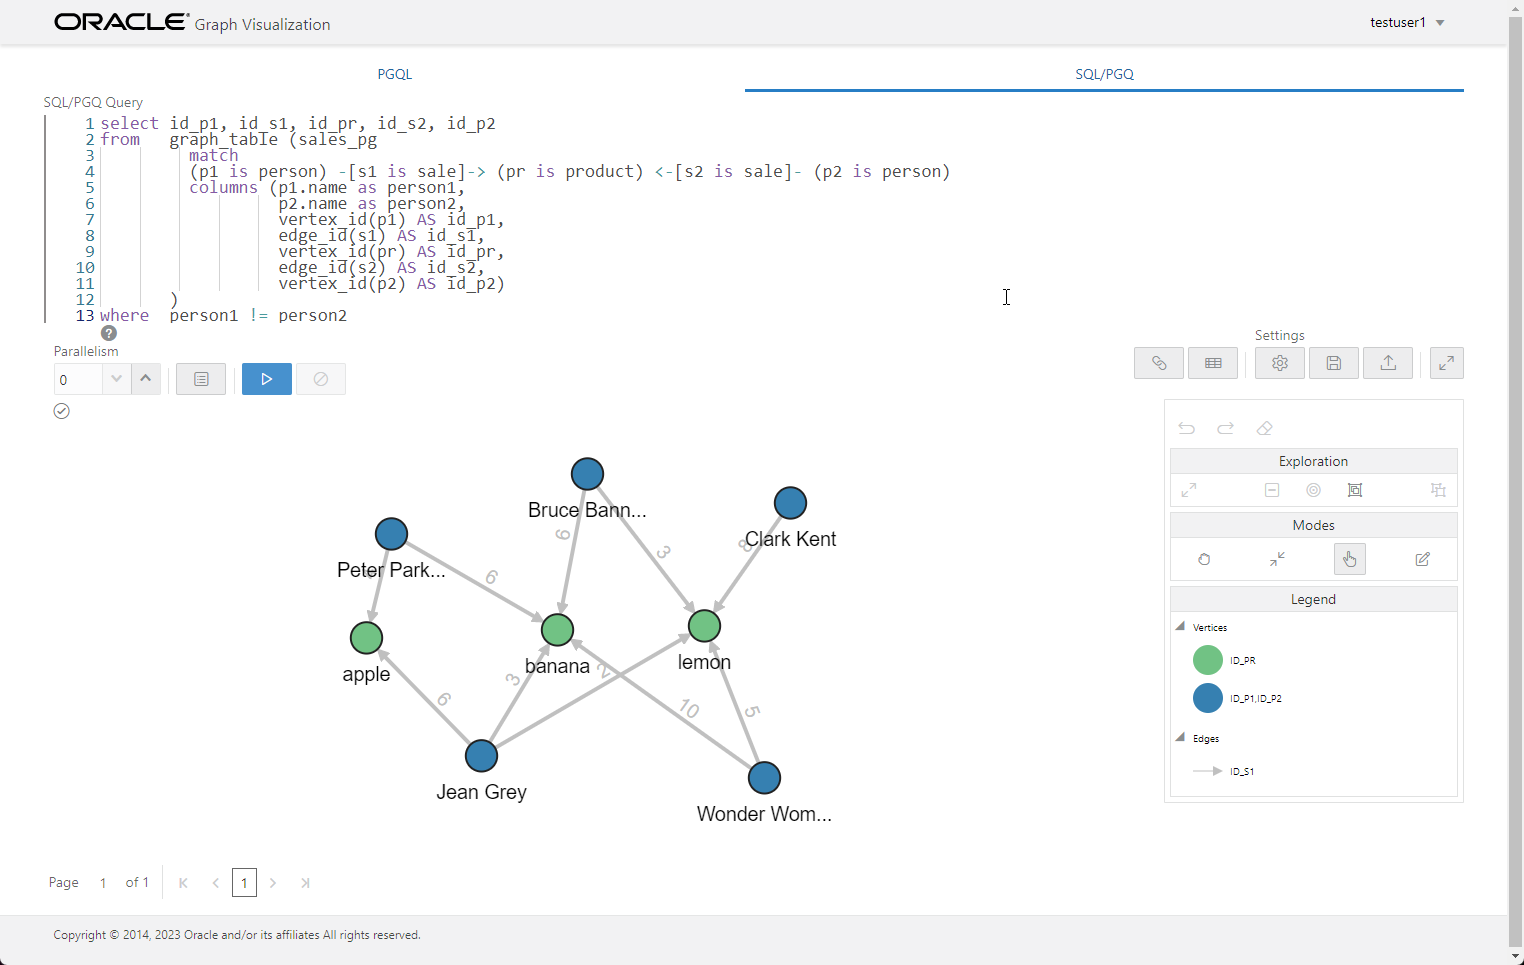 Oracle Graph Visualizer